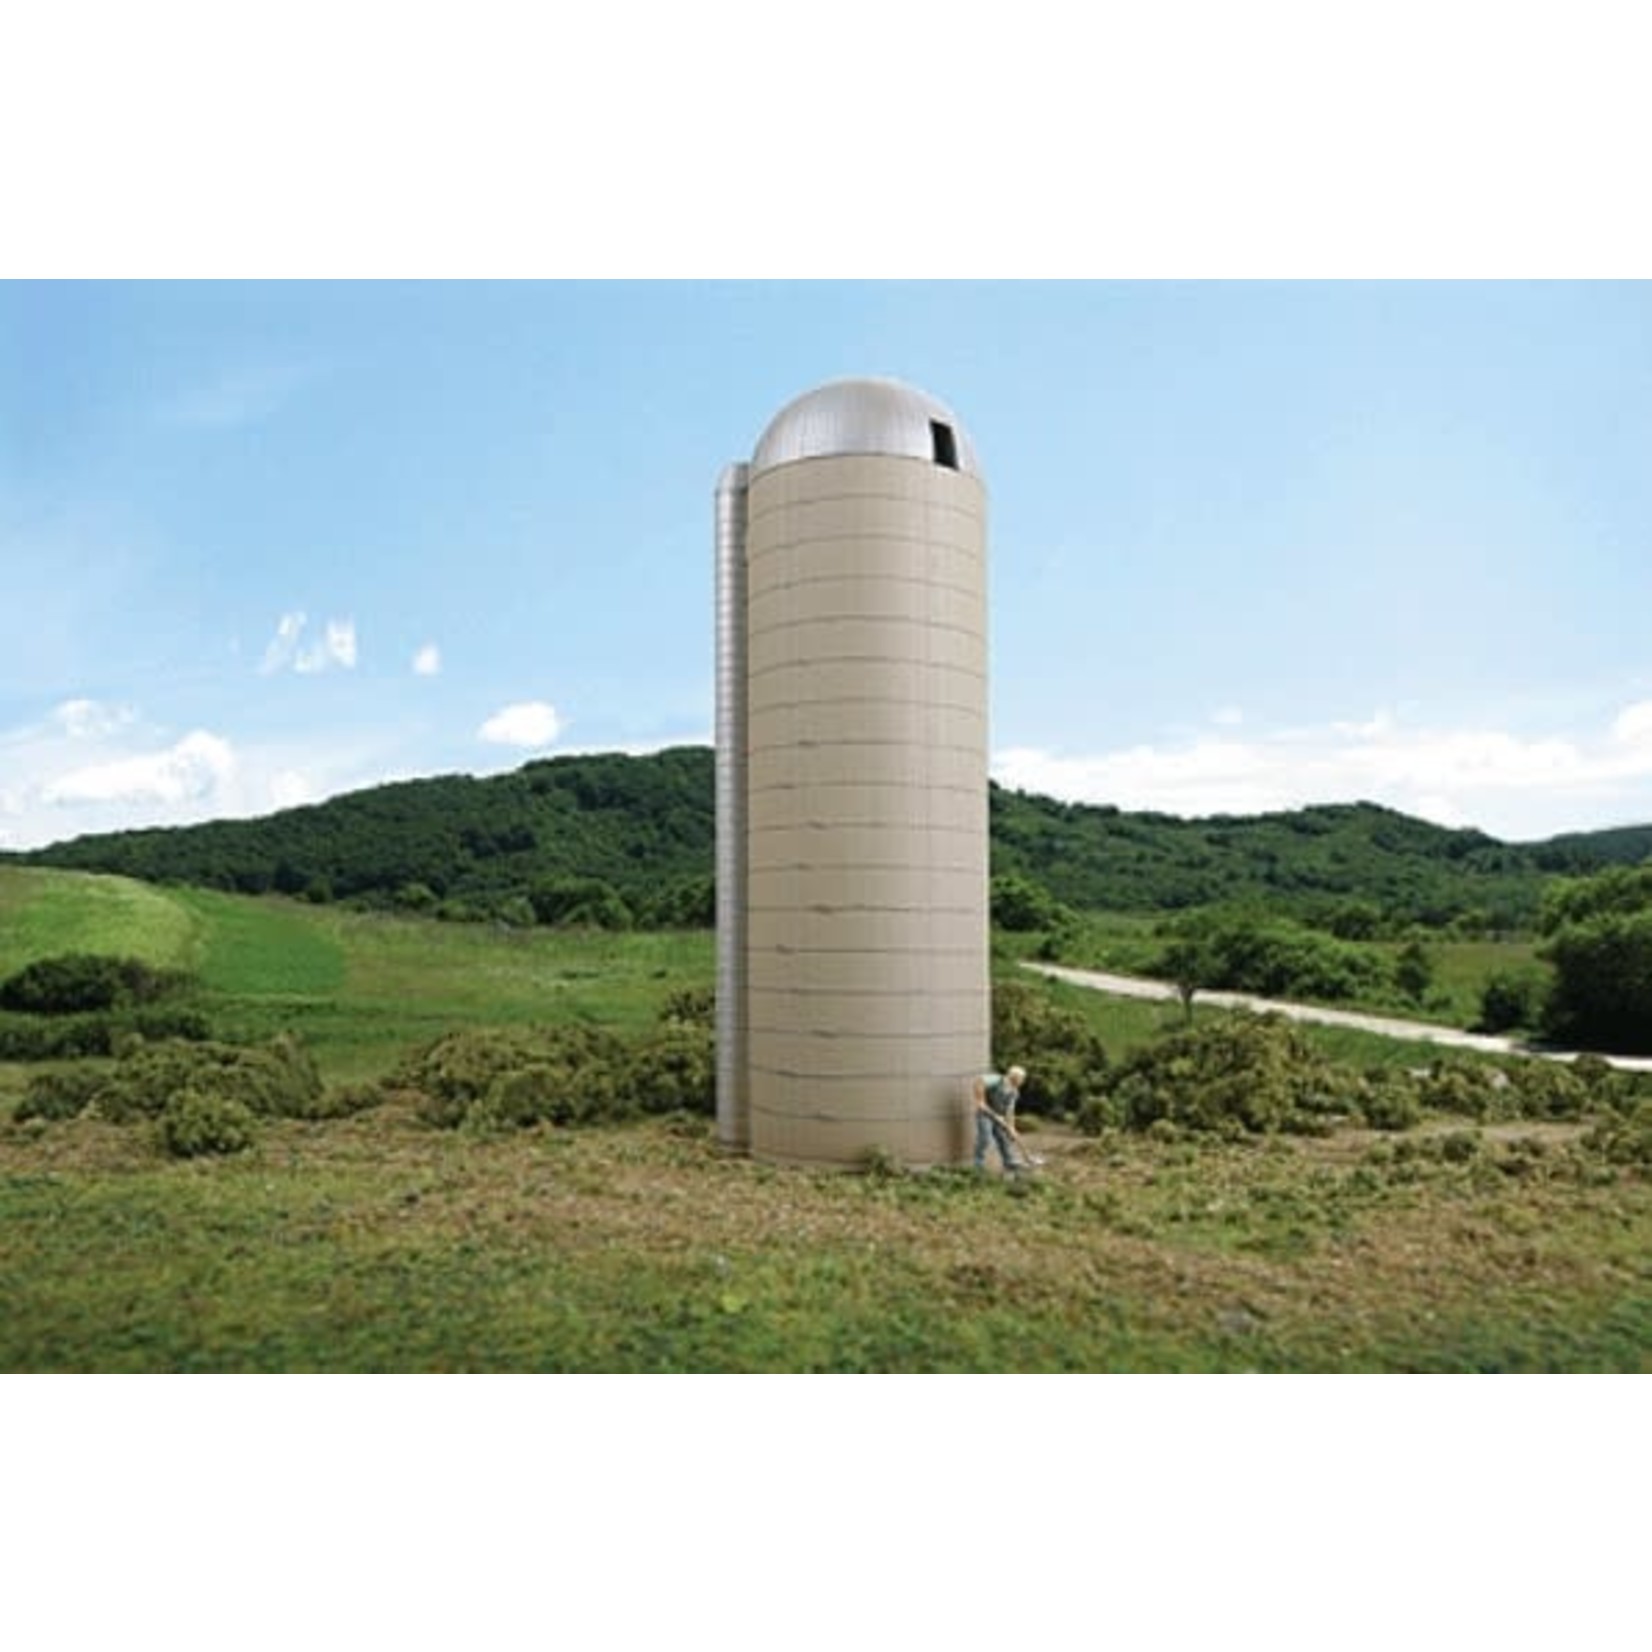 Walthers Cornerstone HO Rural Concrete-Style Silo Kit